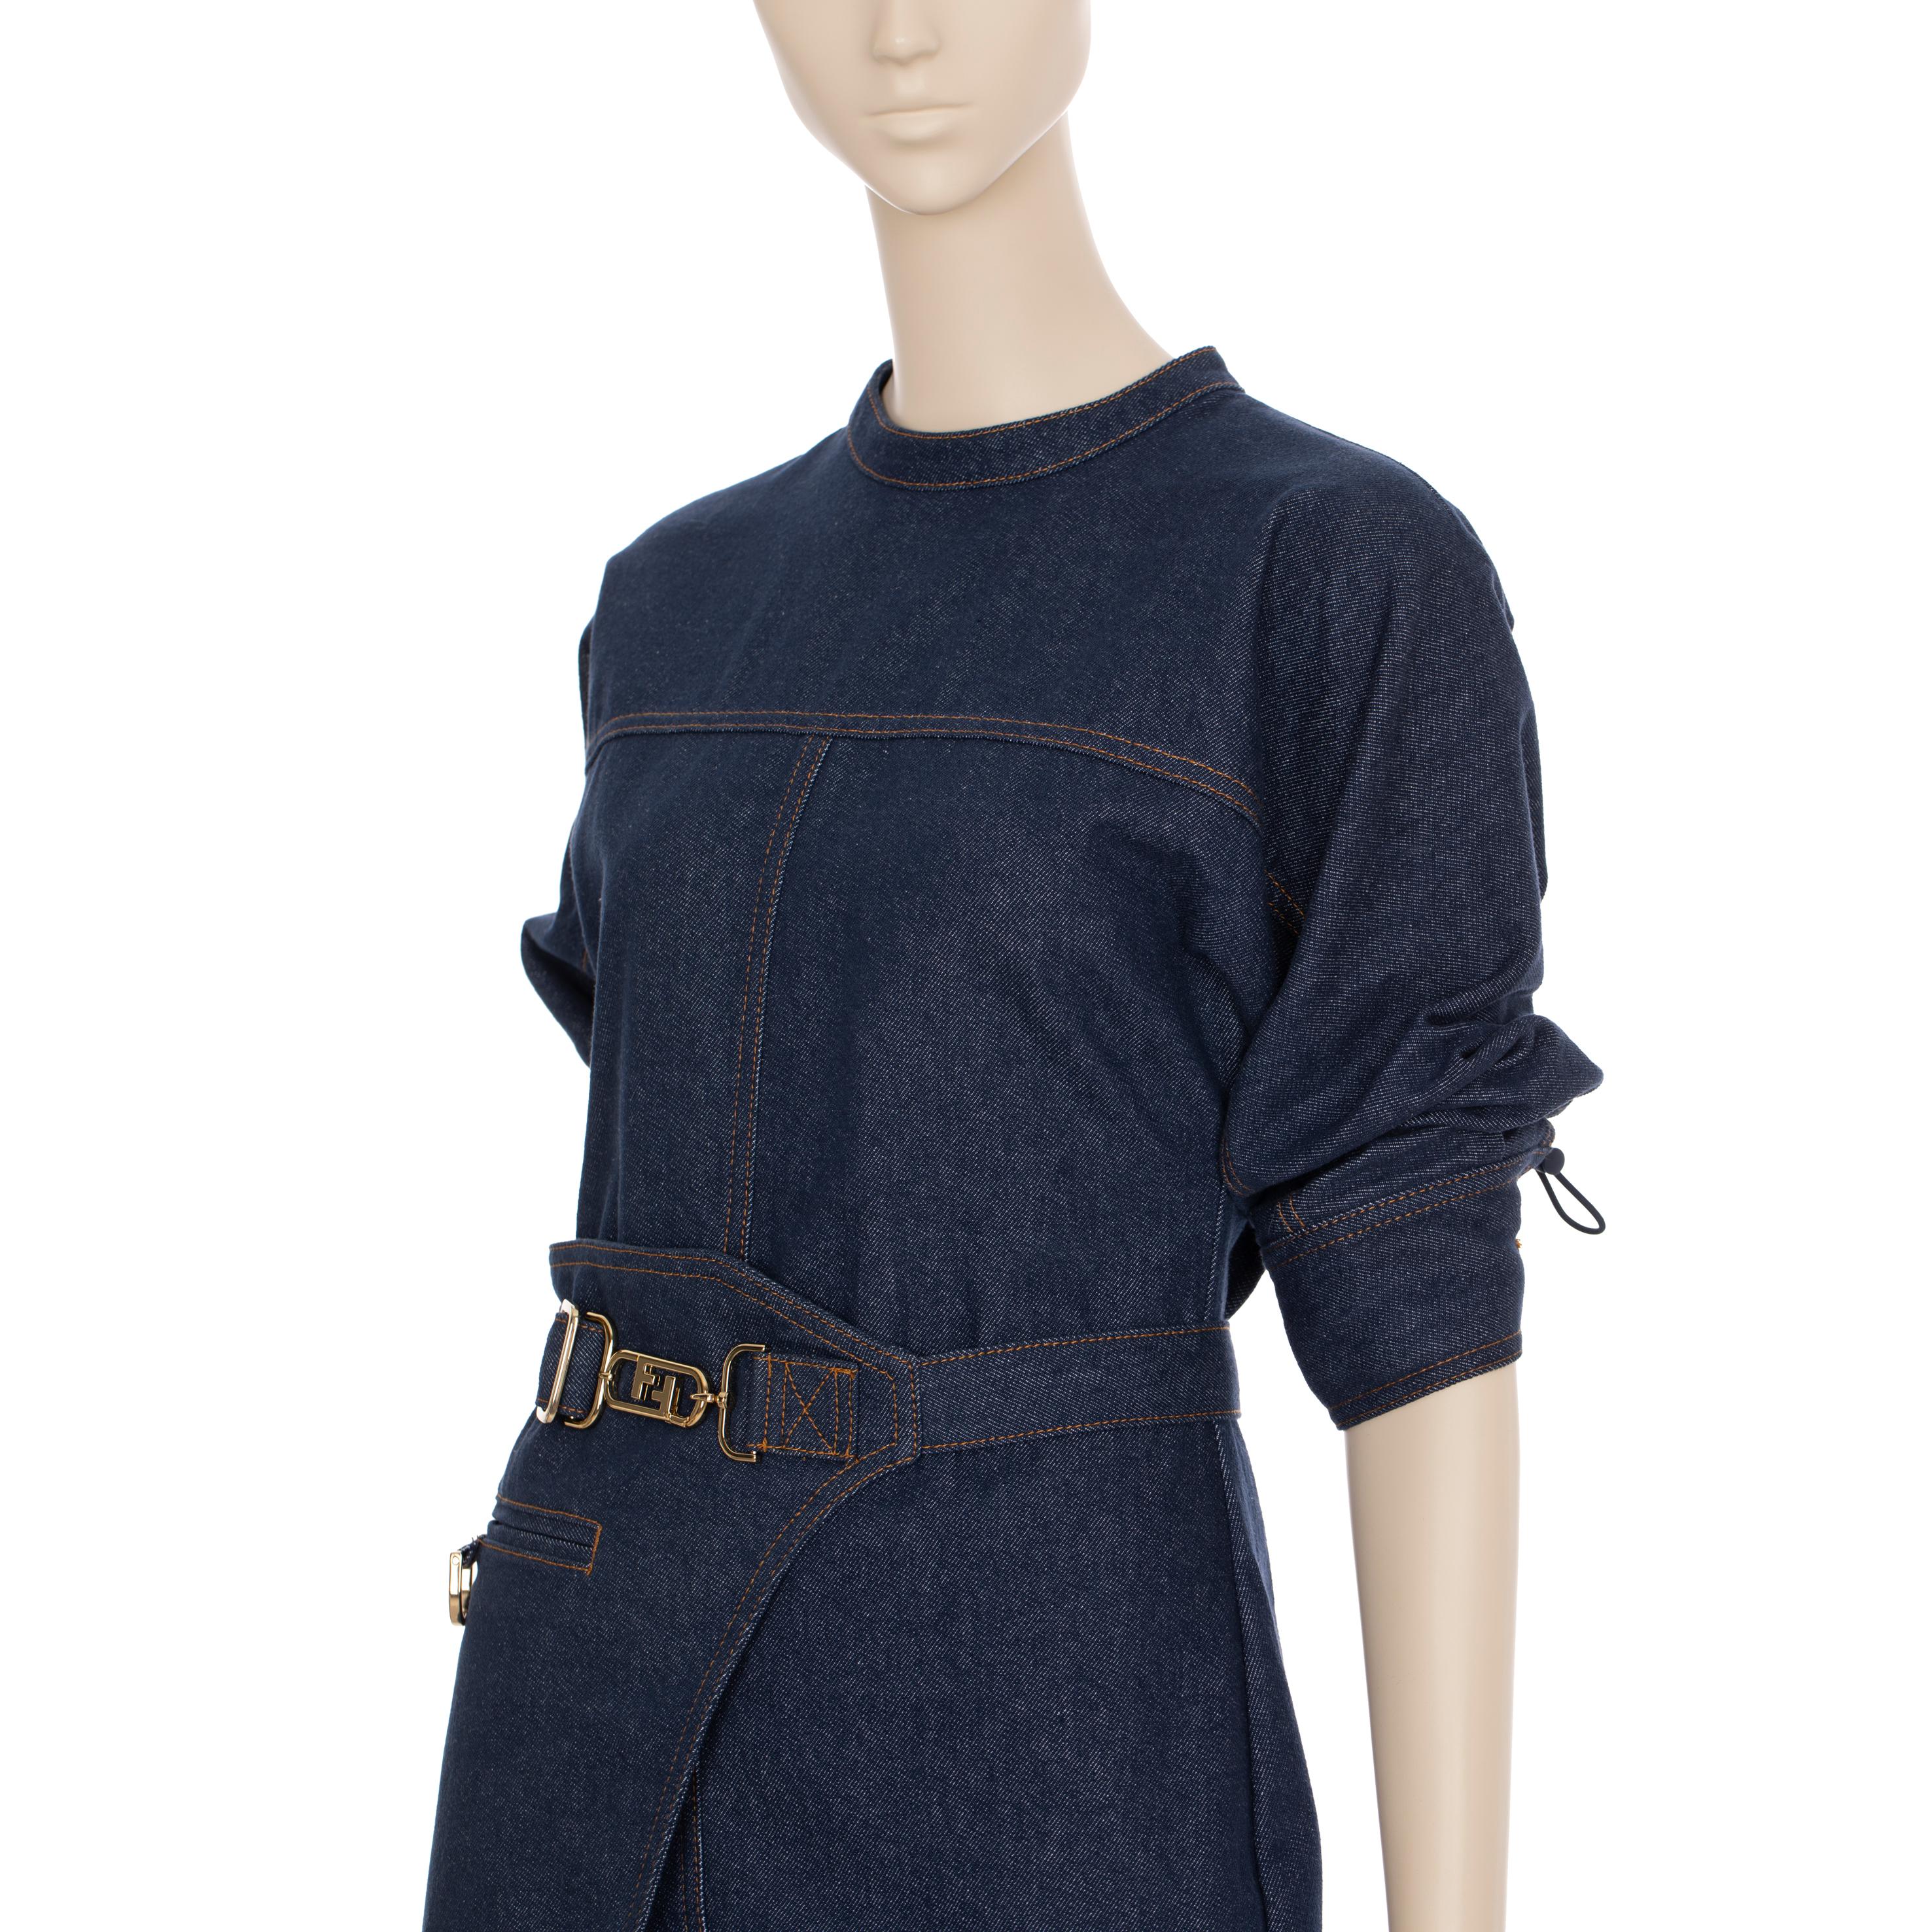 This Fendi denim dress is the perfect combination of bold sophistication and functional style. Boasting a side belt bag and gold-tone hardware.

Brand: Fendi

Product: Denim Dress With Belt Bag

Size: 36 IT

Colour: Denim Blue

Material: 100%